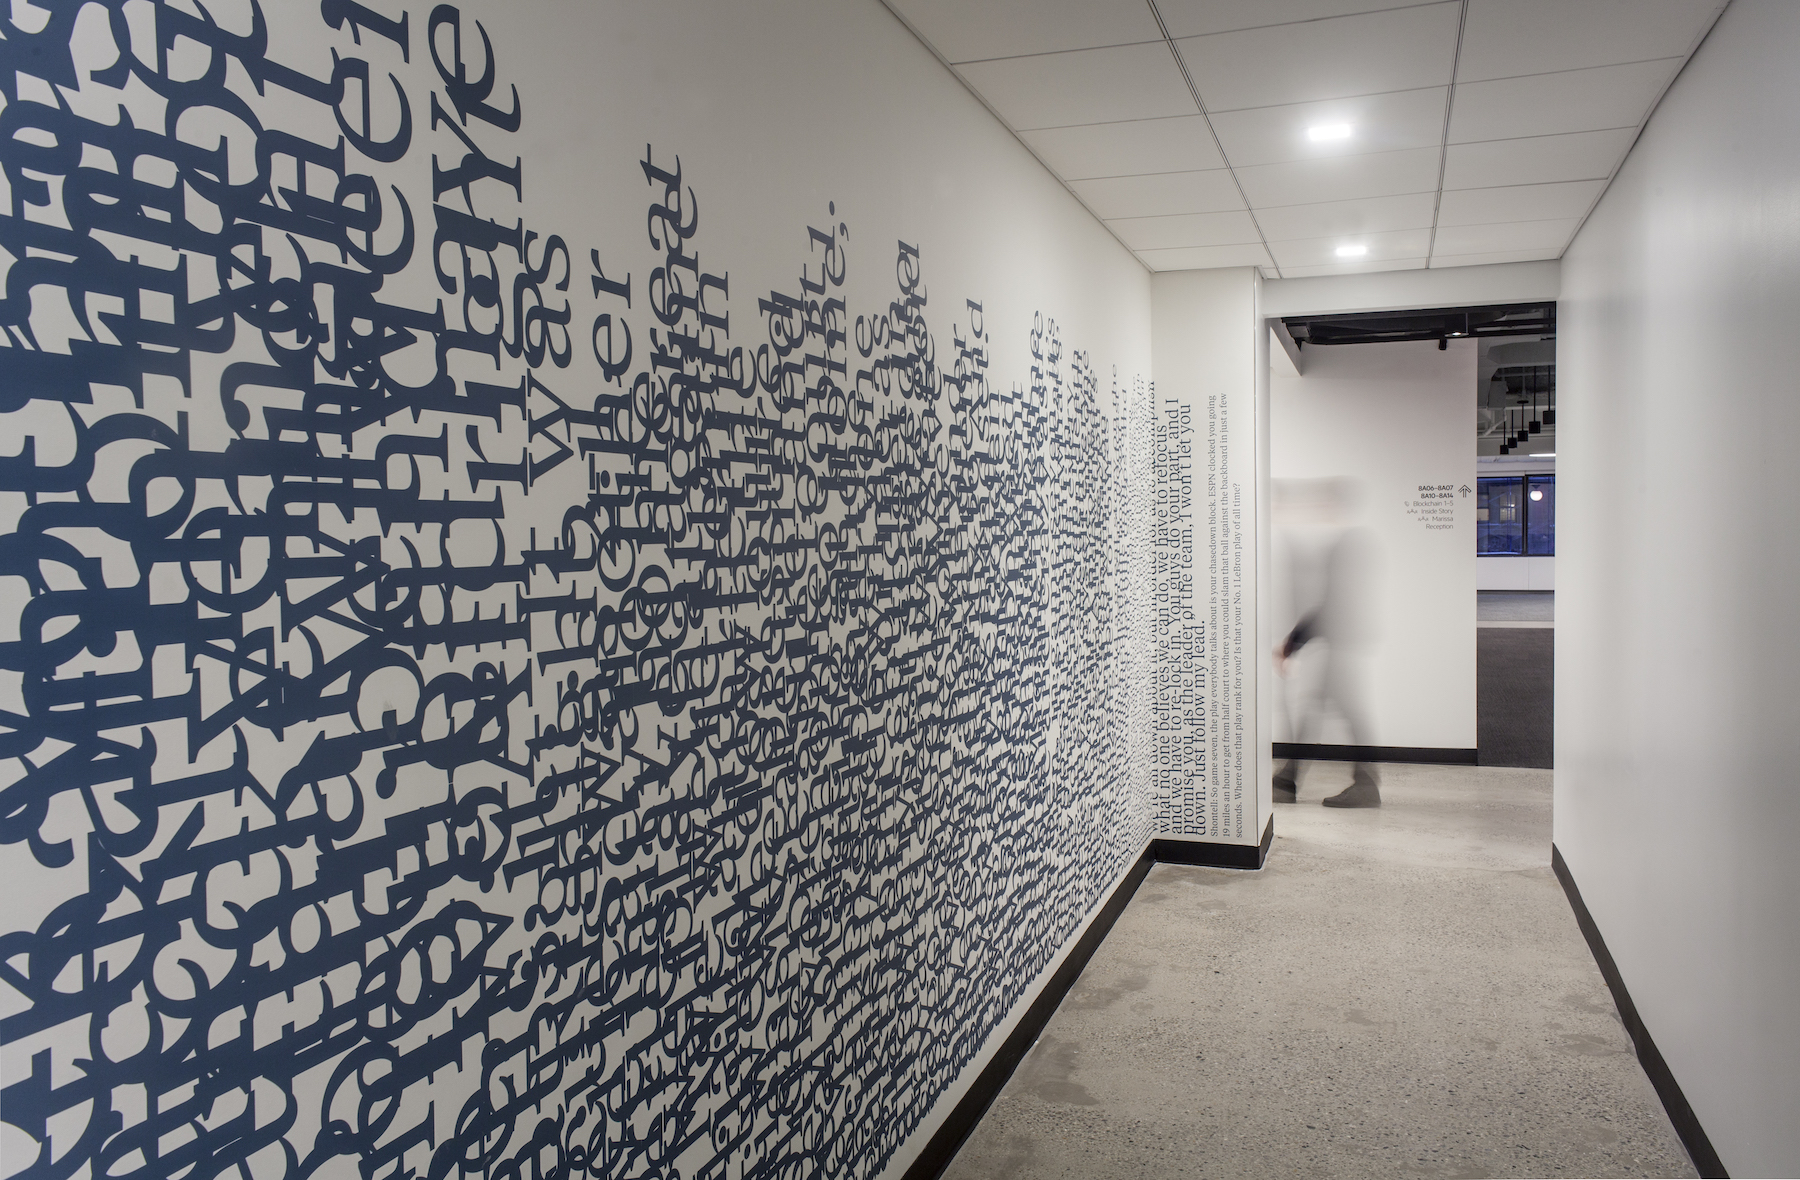 Wall graphics for Business Insider